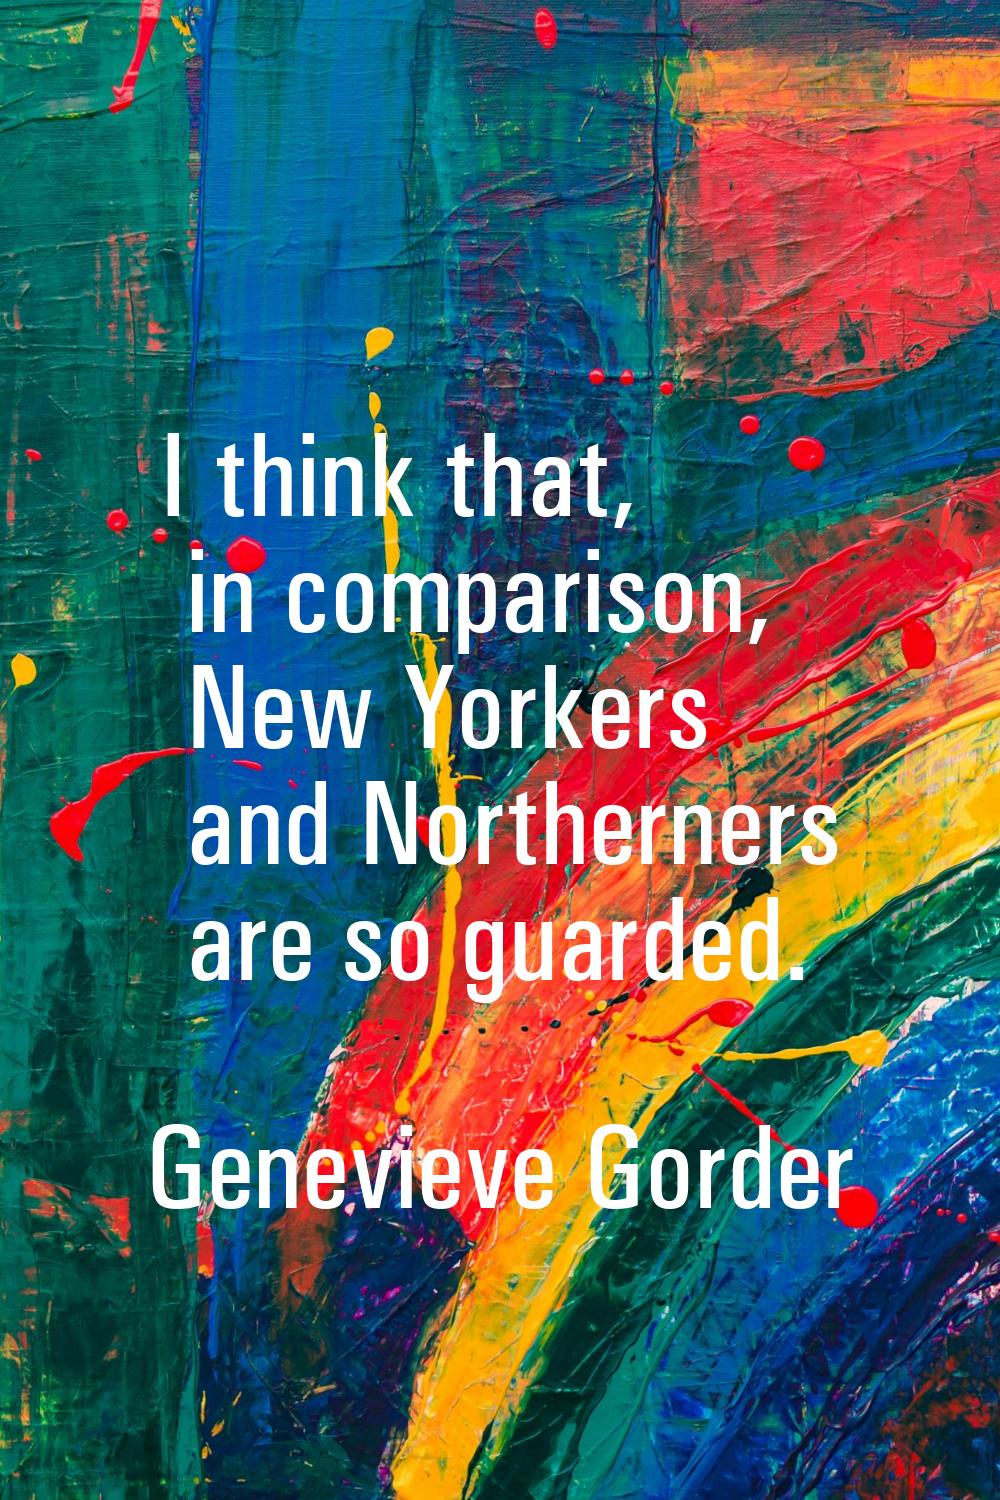 I think that, in comparison, New Yorkers and Northerners are so guarded.